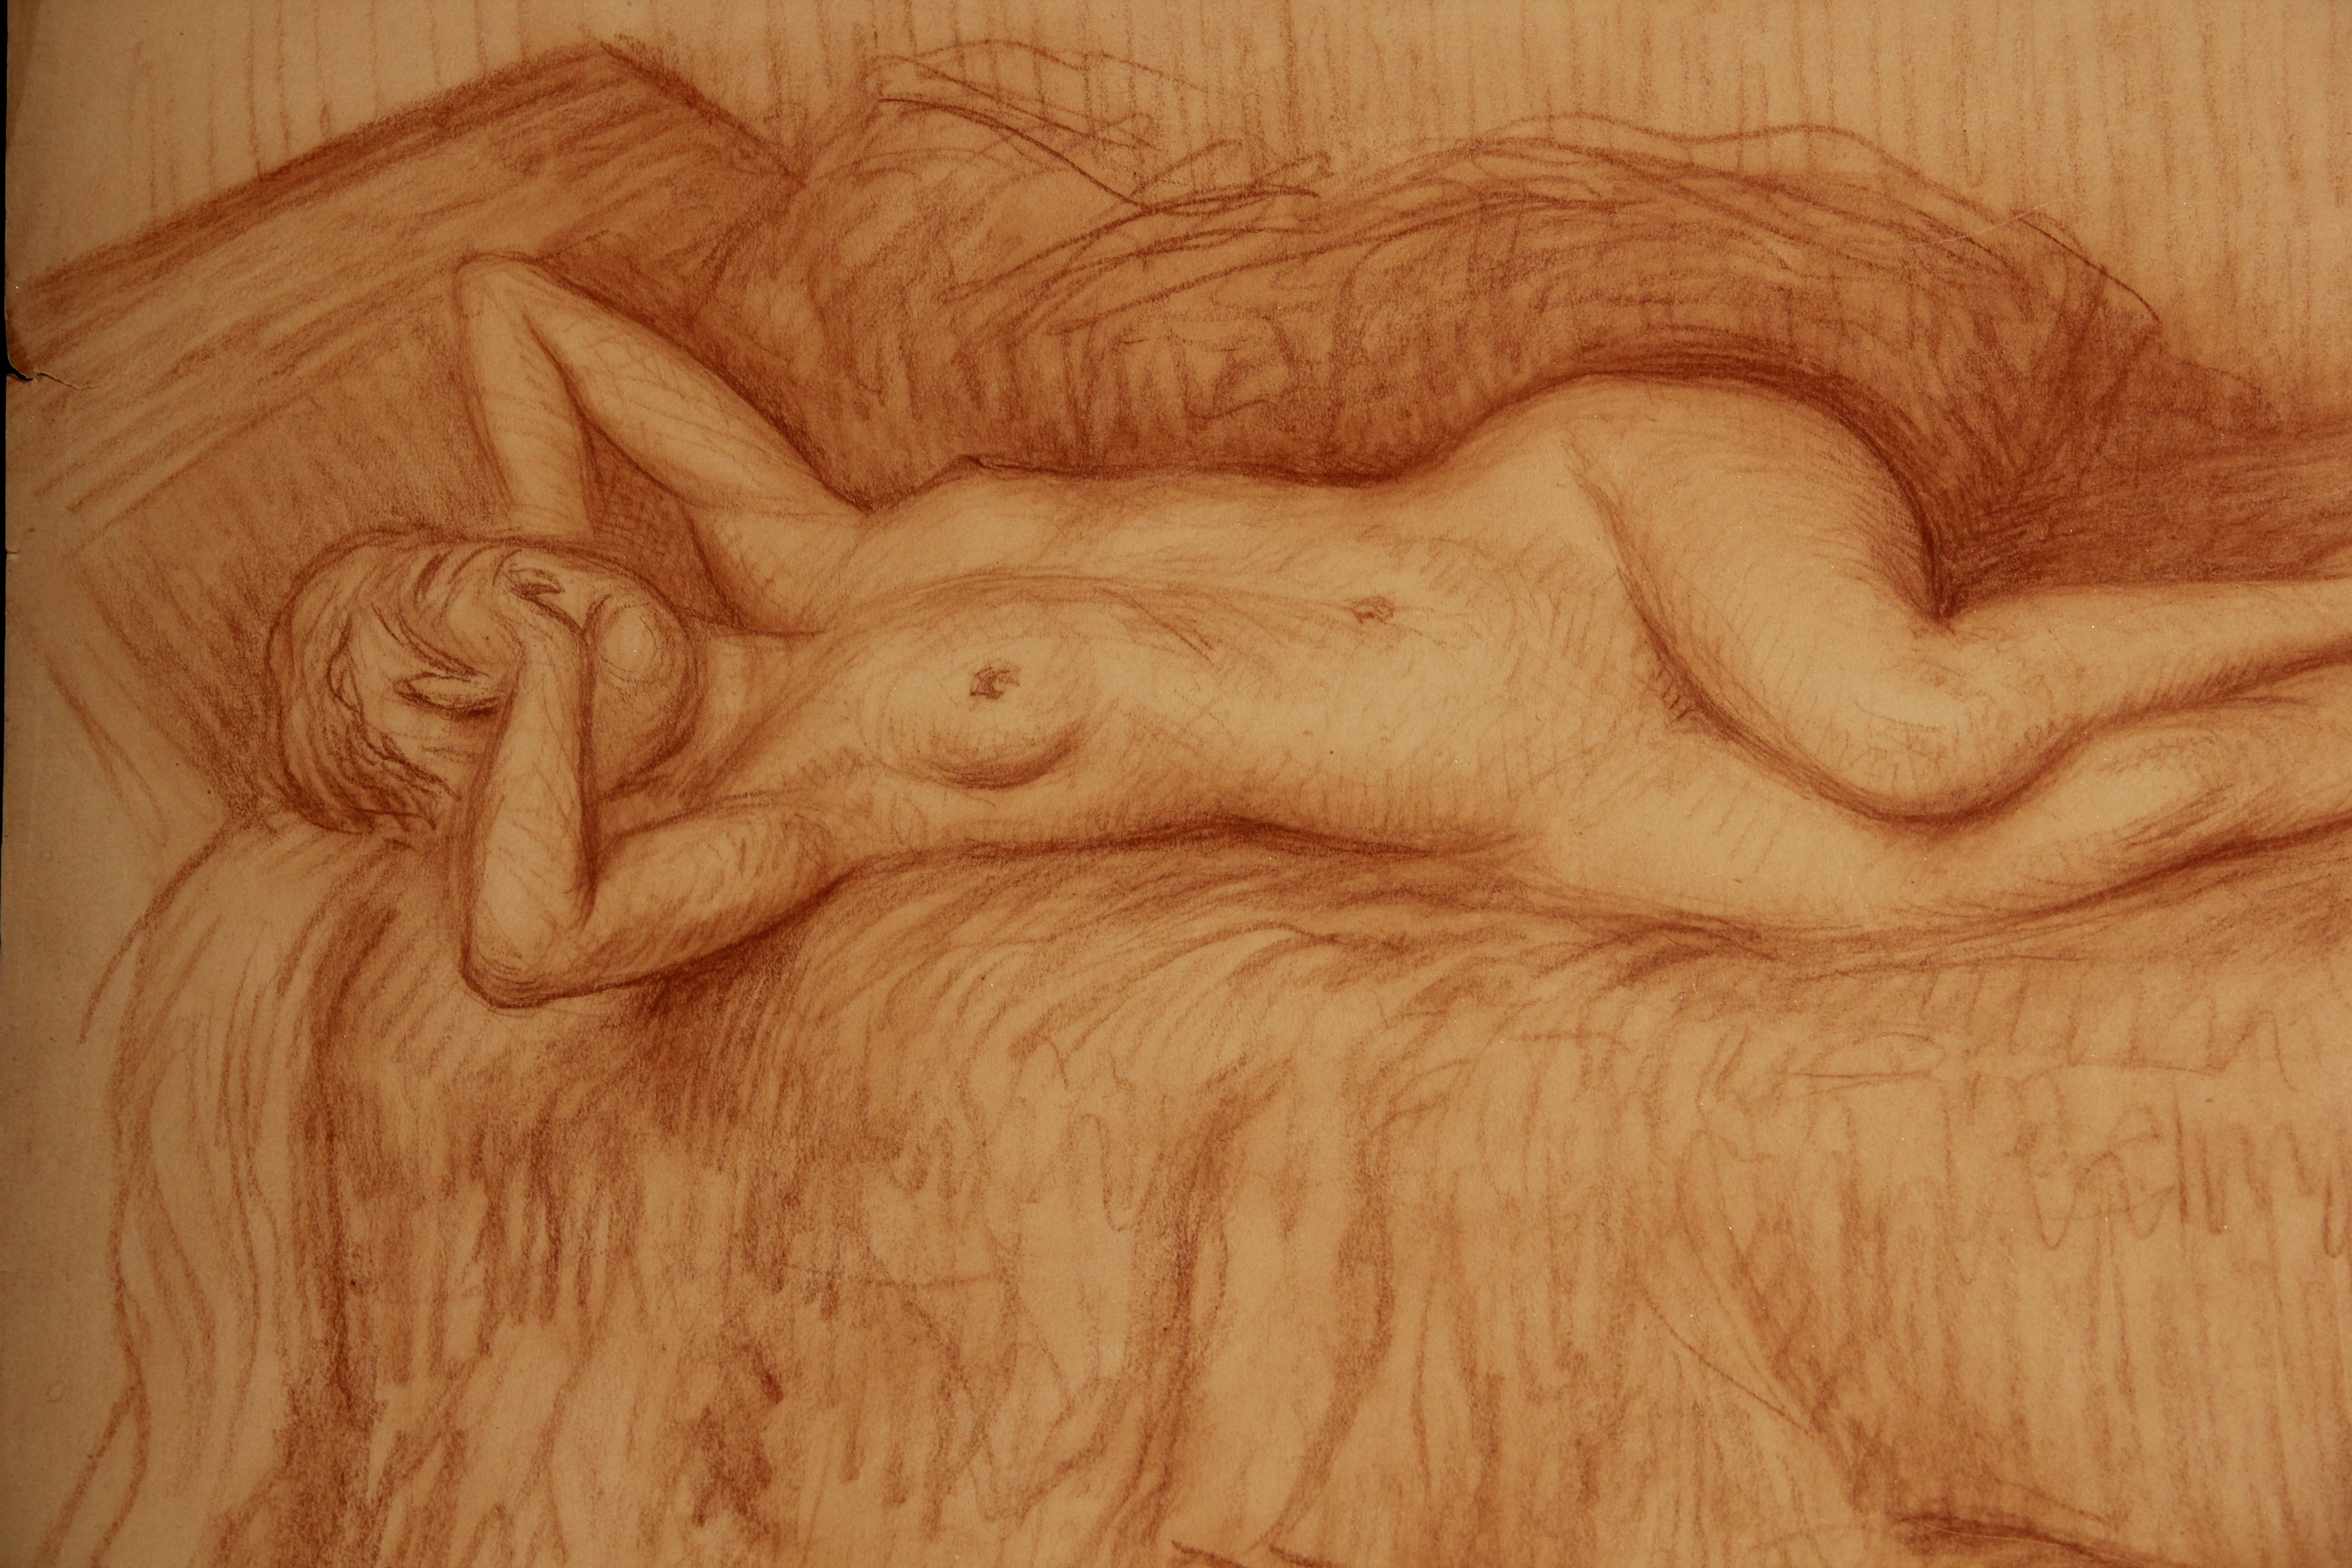 Reclining Nude Woman Covering Her Face - Art by Emile Lejeune